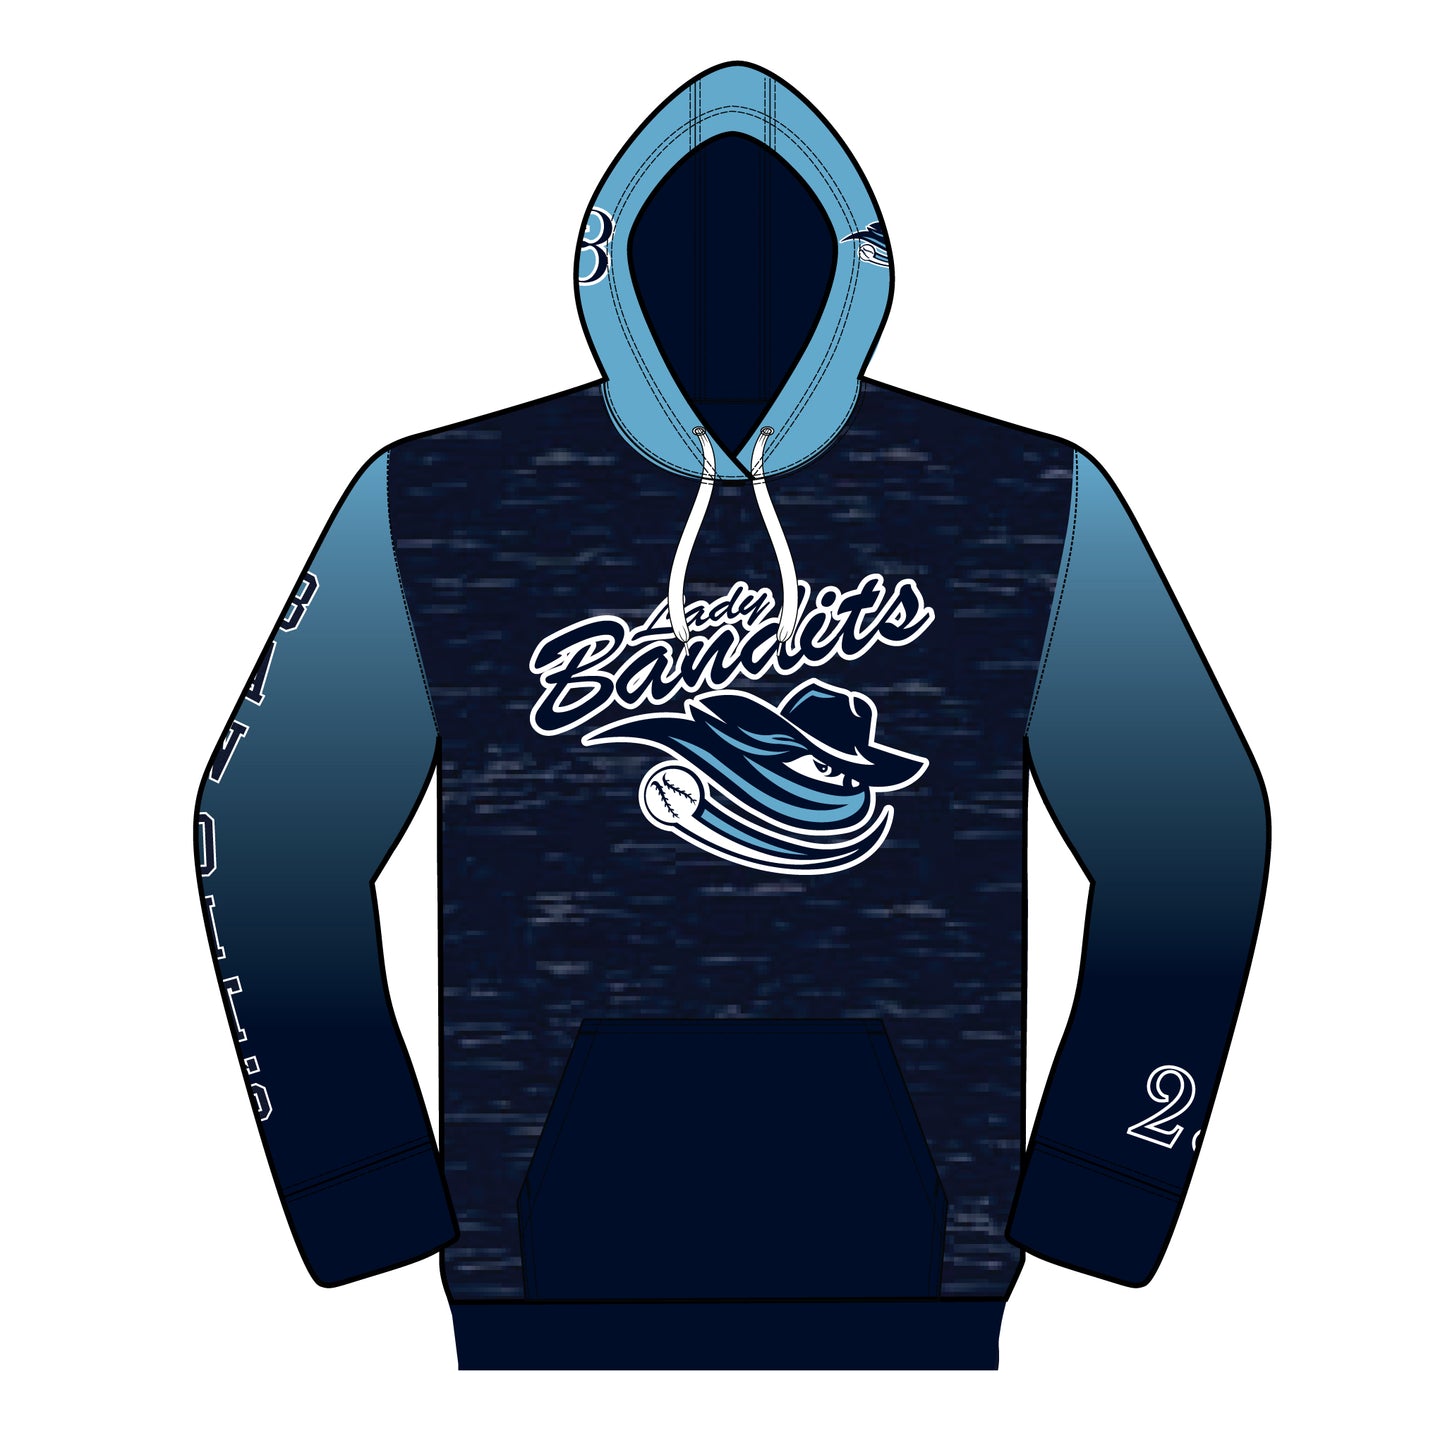 Champro Sublimated Classic Hoodie